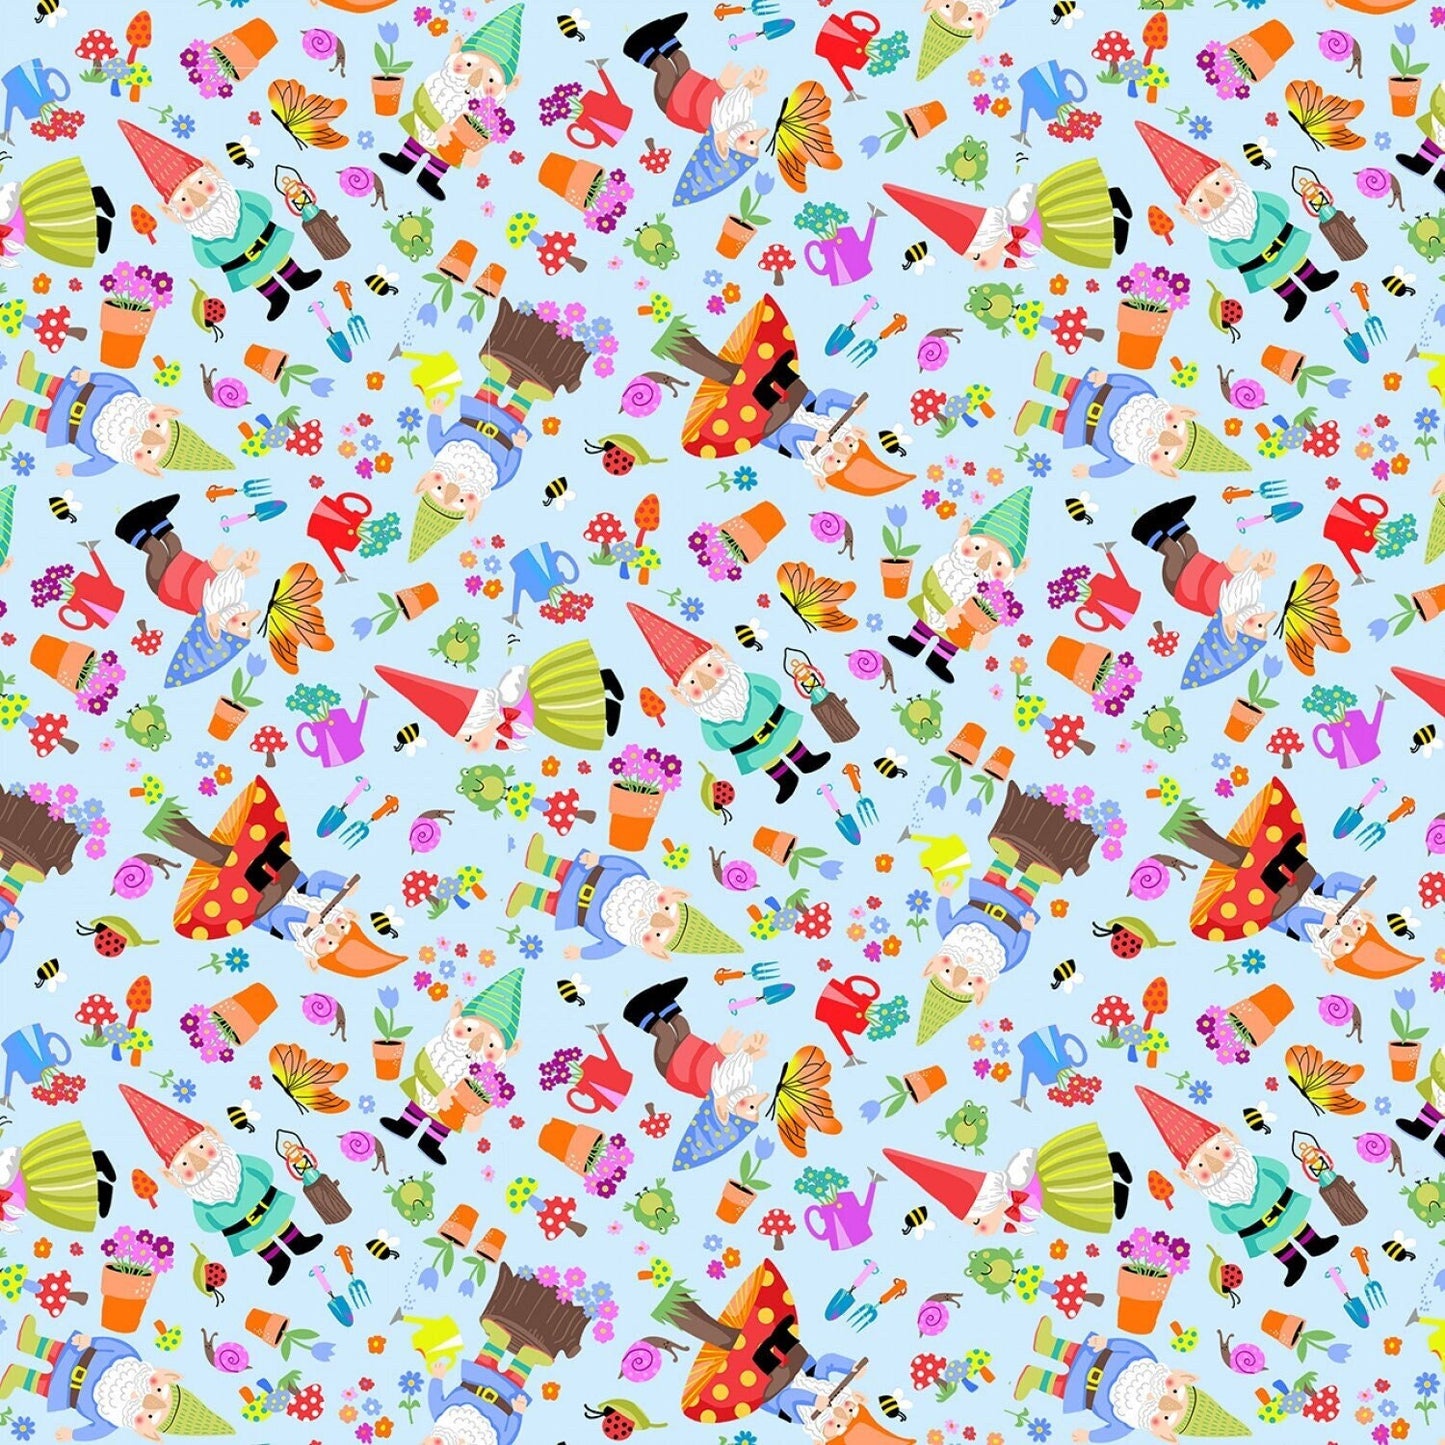 Gnome fabric by the yard - Gnome Sweet Home - Timeless Treasures - 100% Cotton Fabric - Colorful Garden gnome material - Ships NEXT DAY